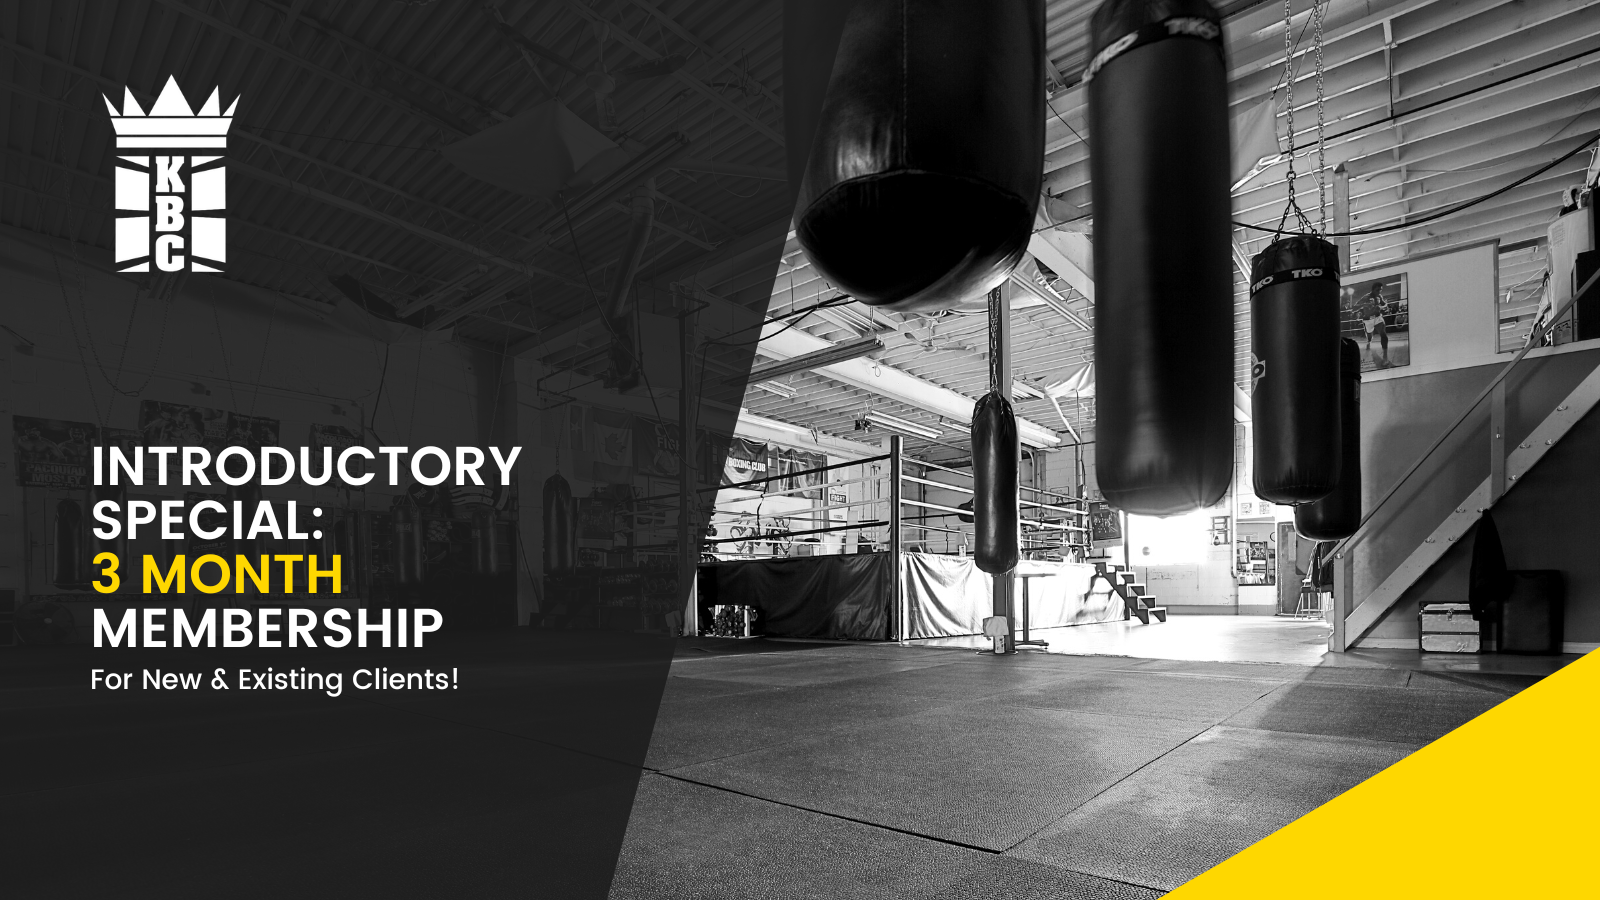 ALL NEW INTRODUCTORY SPECIAL: 3 Month Membership with Kingsway Boxing Club 🥊